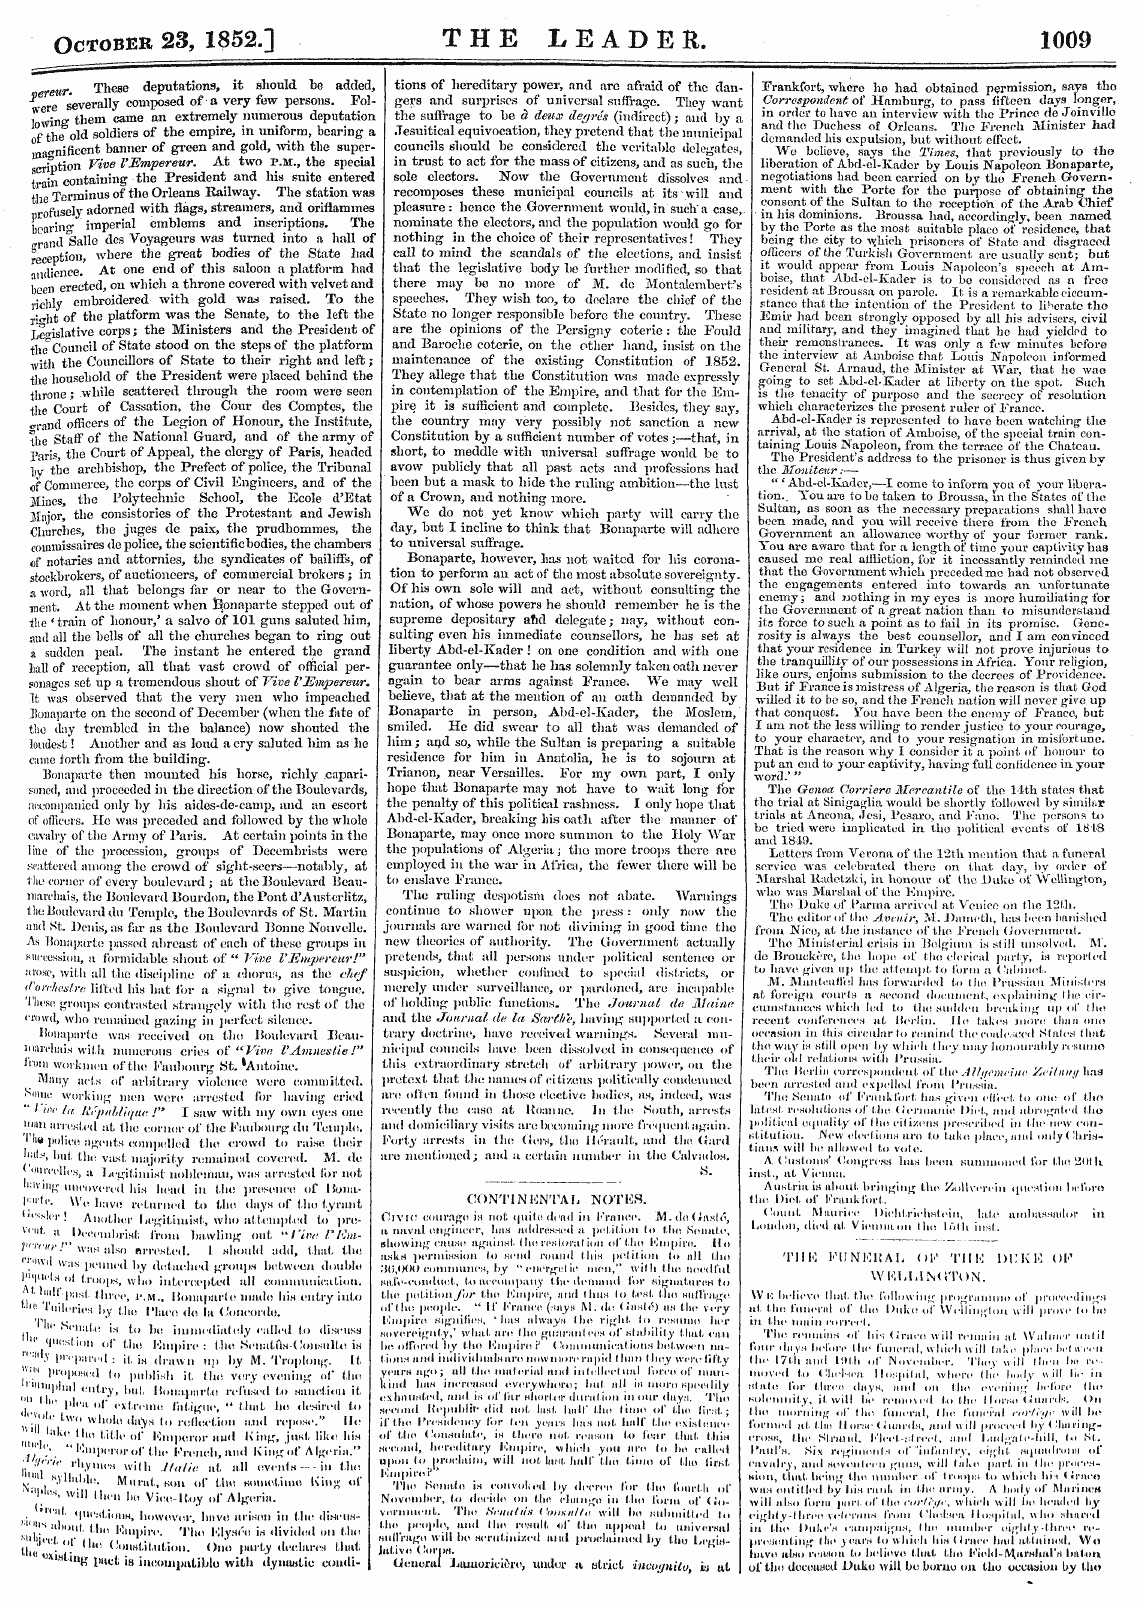 Leader (1850-1860): jS F Y, Country edition - October 23, 1852.] The Leader. 1009